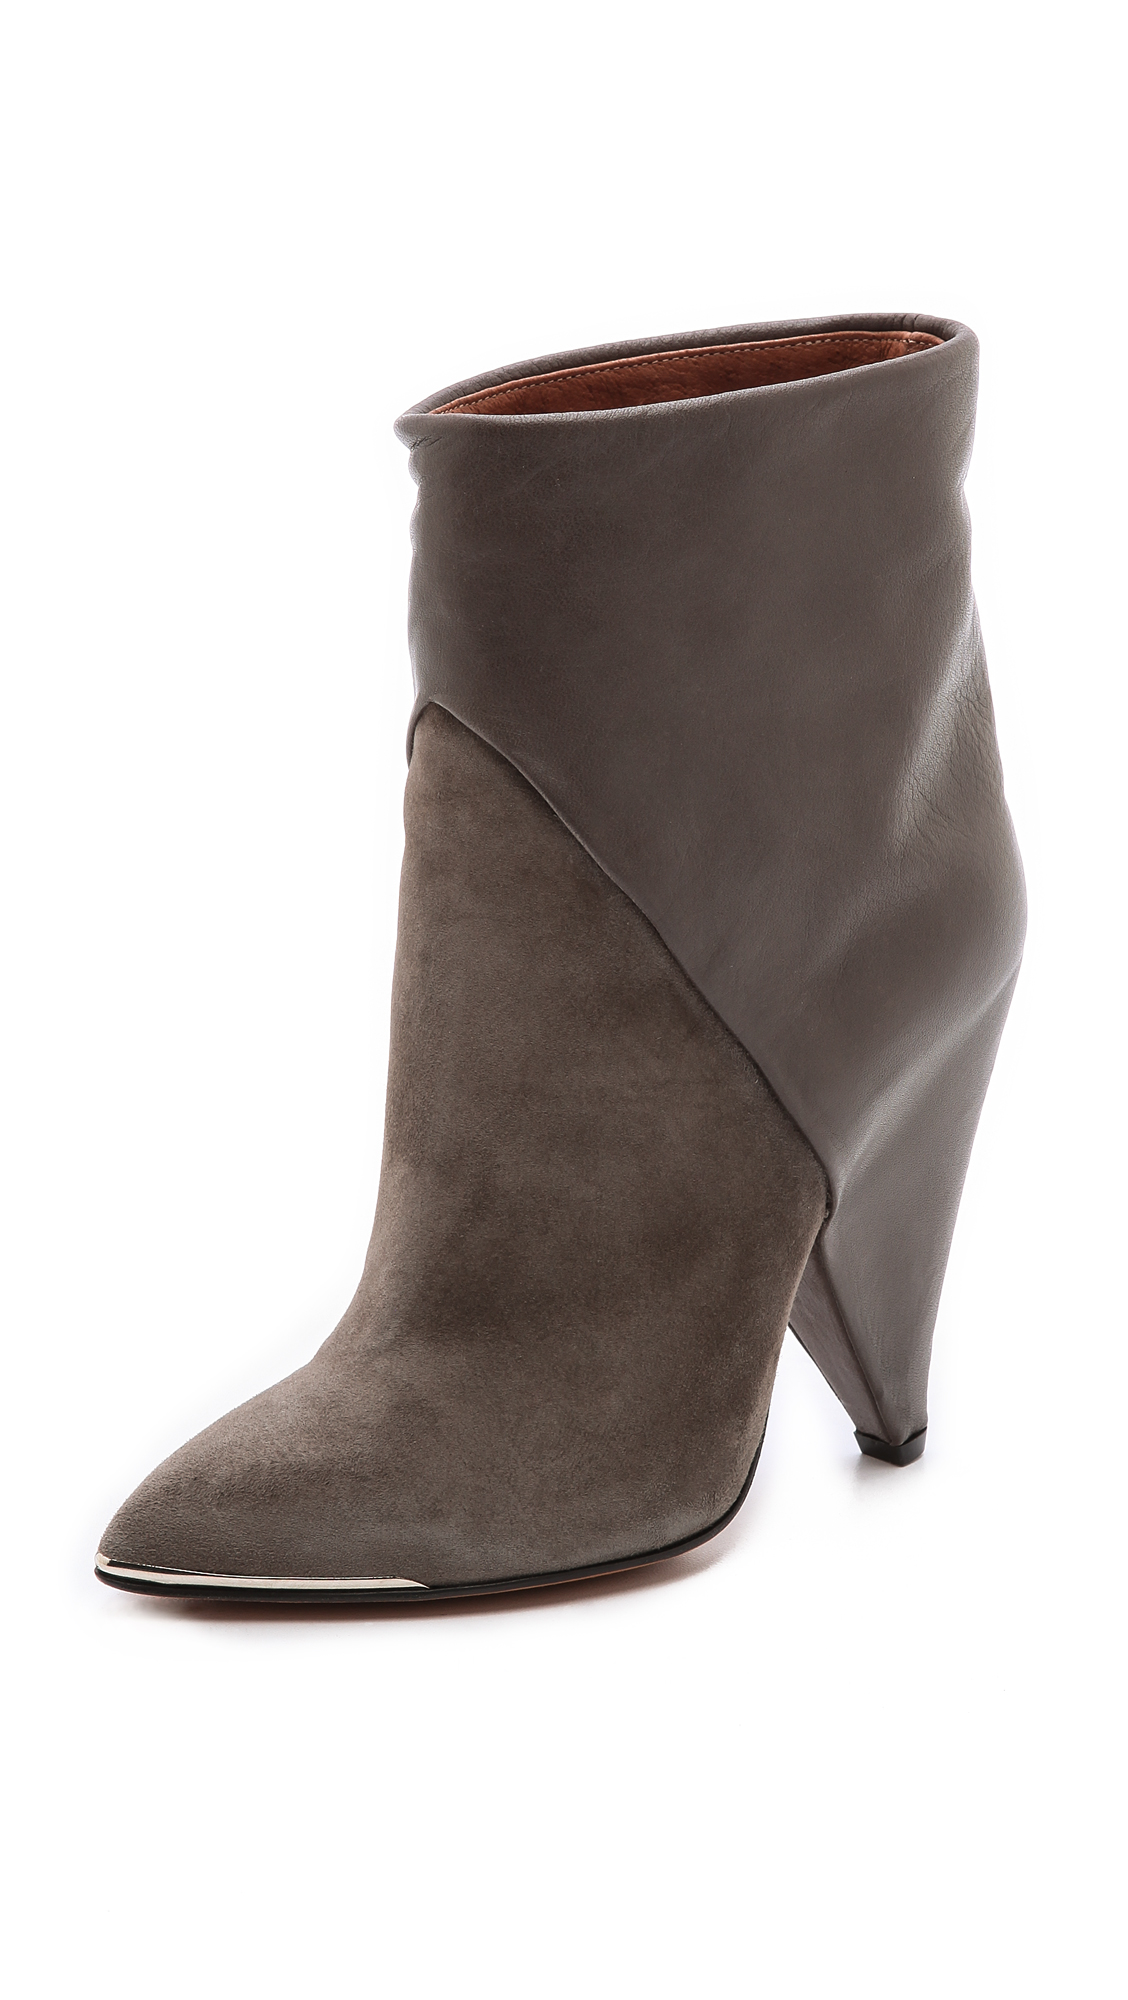 IRO Daithy Cone Heel Booties in Taupe (Brown) - Lyst